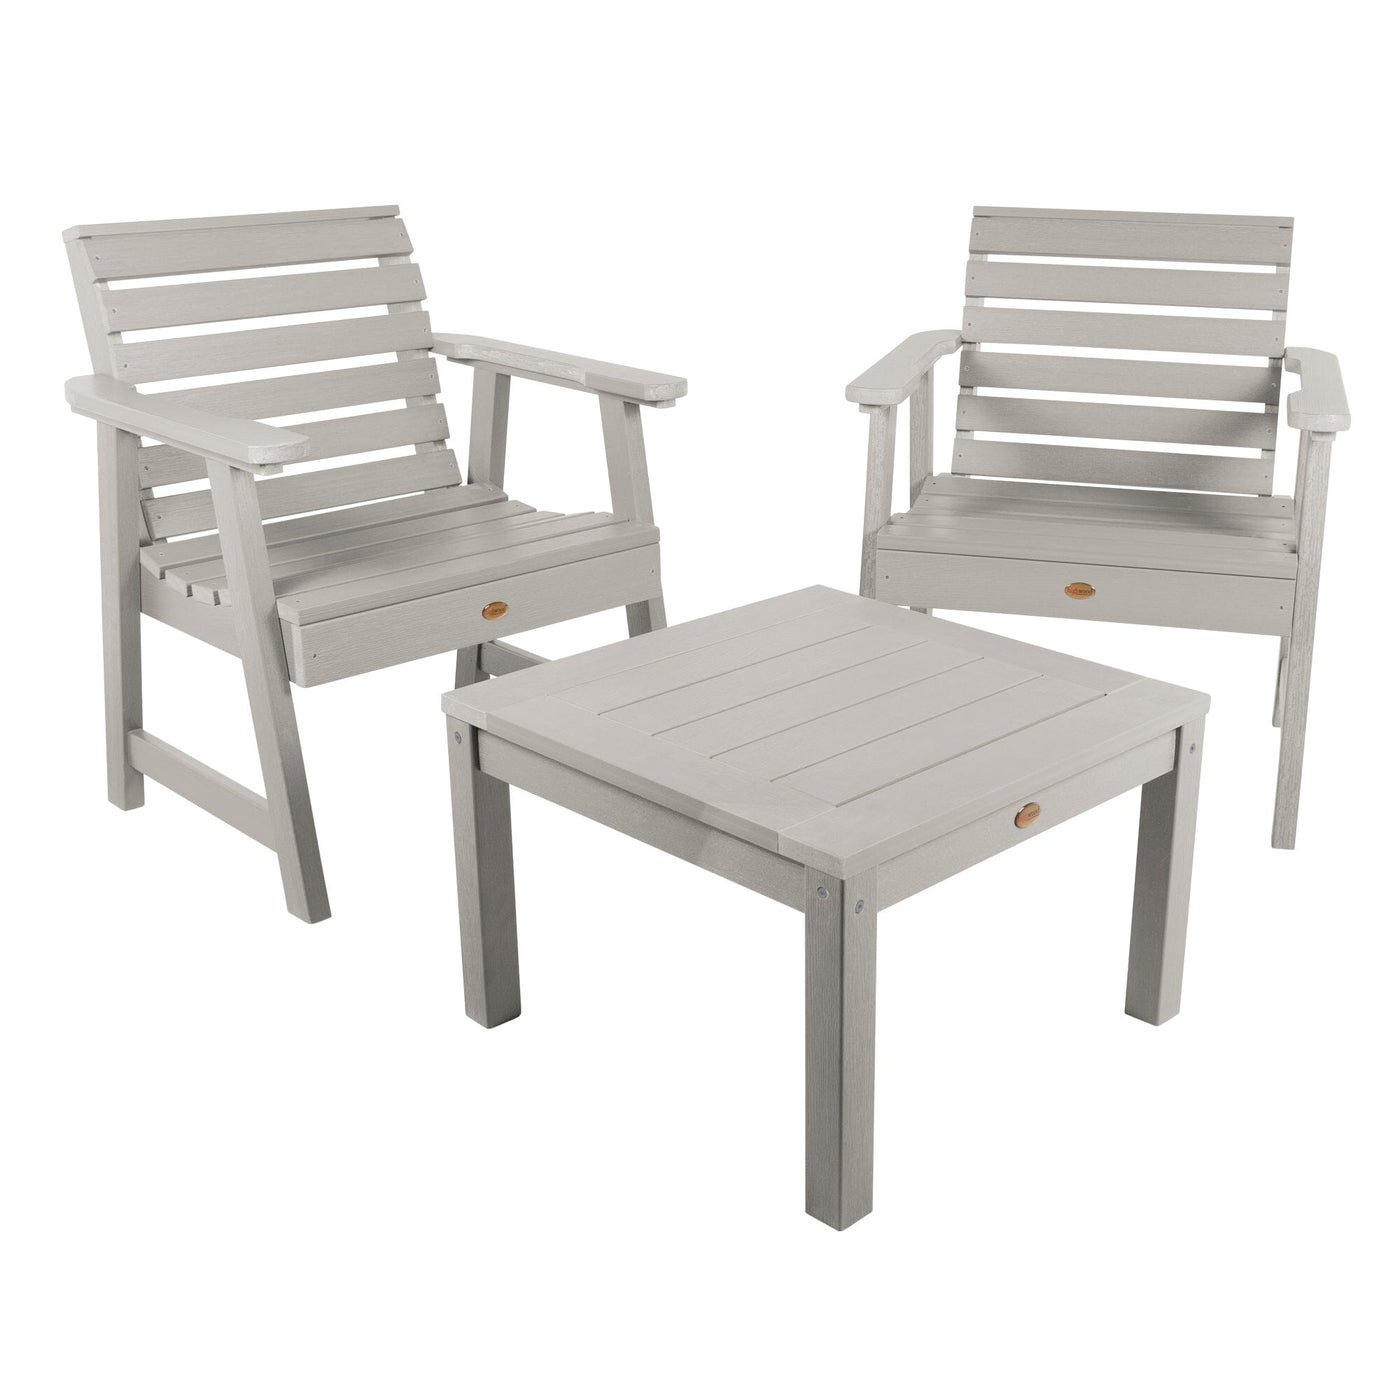 2 Weatherly Garden Chairs with Square Side Table Kitted Sets Highwood USA Harbor Gray 